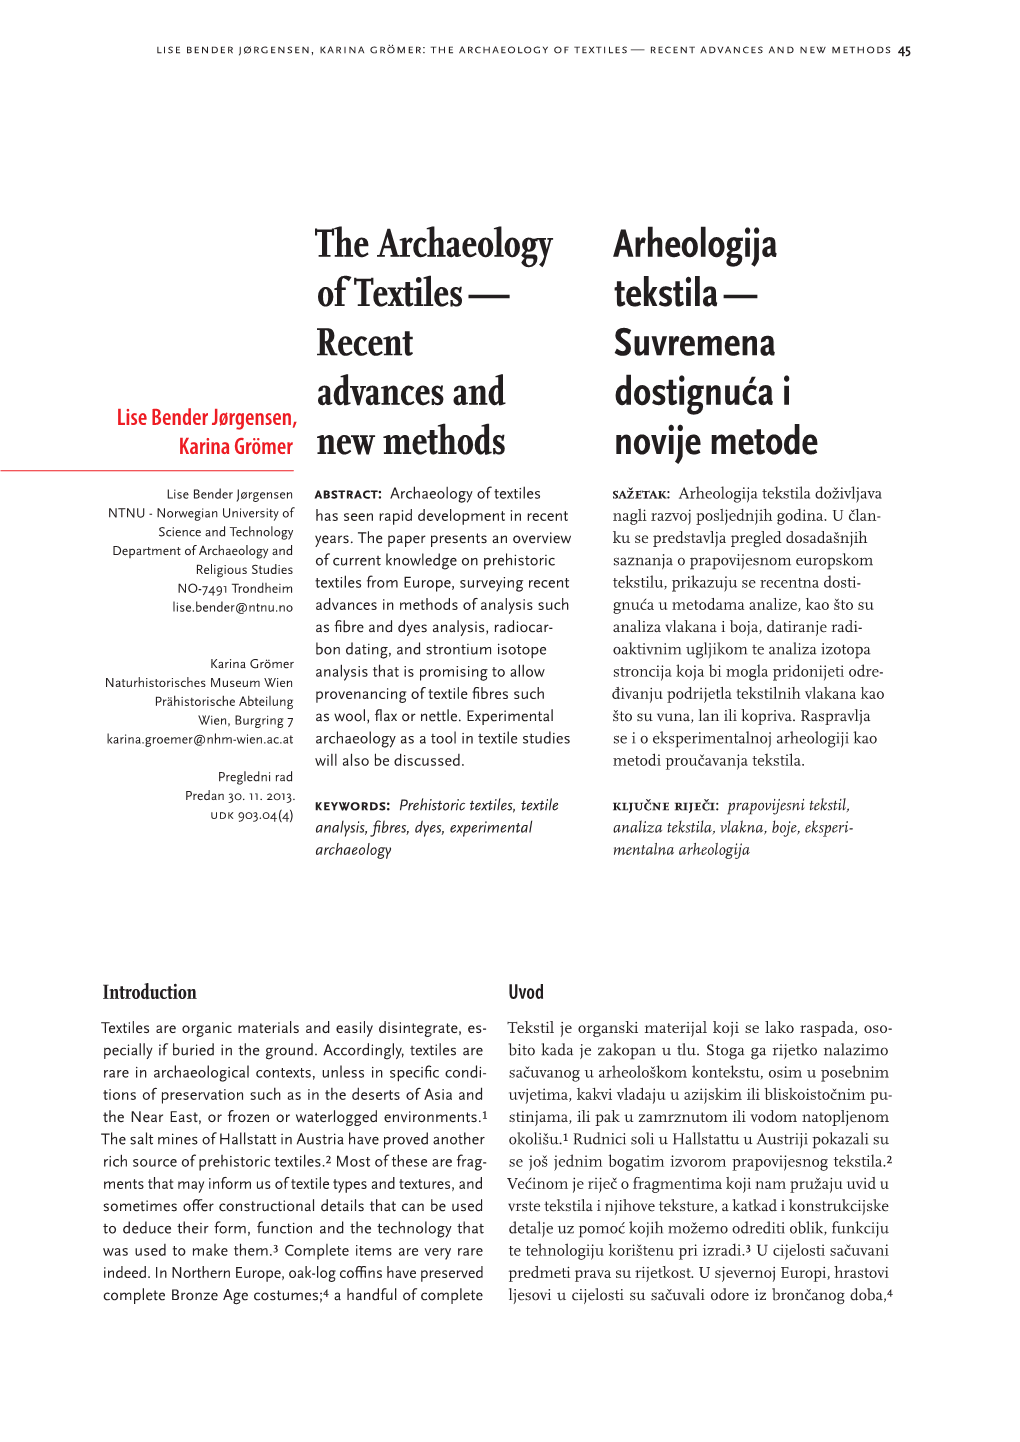 The Archaeology of Textiles — Recent Advances and New Methods 45